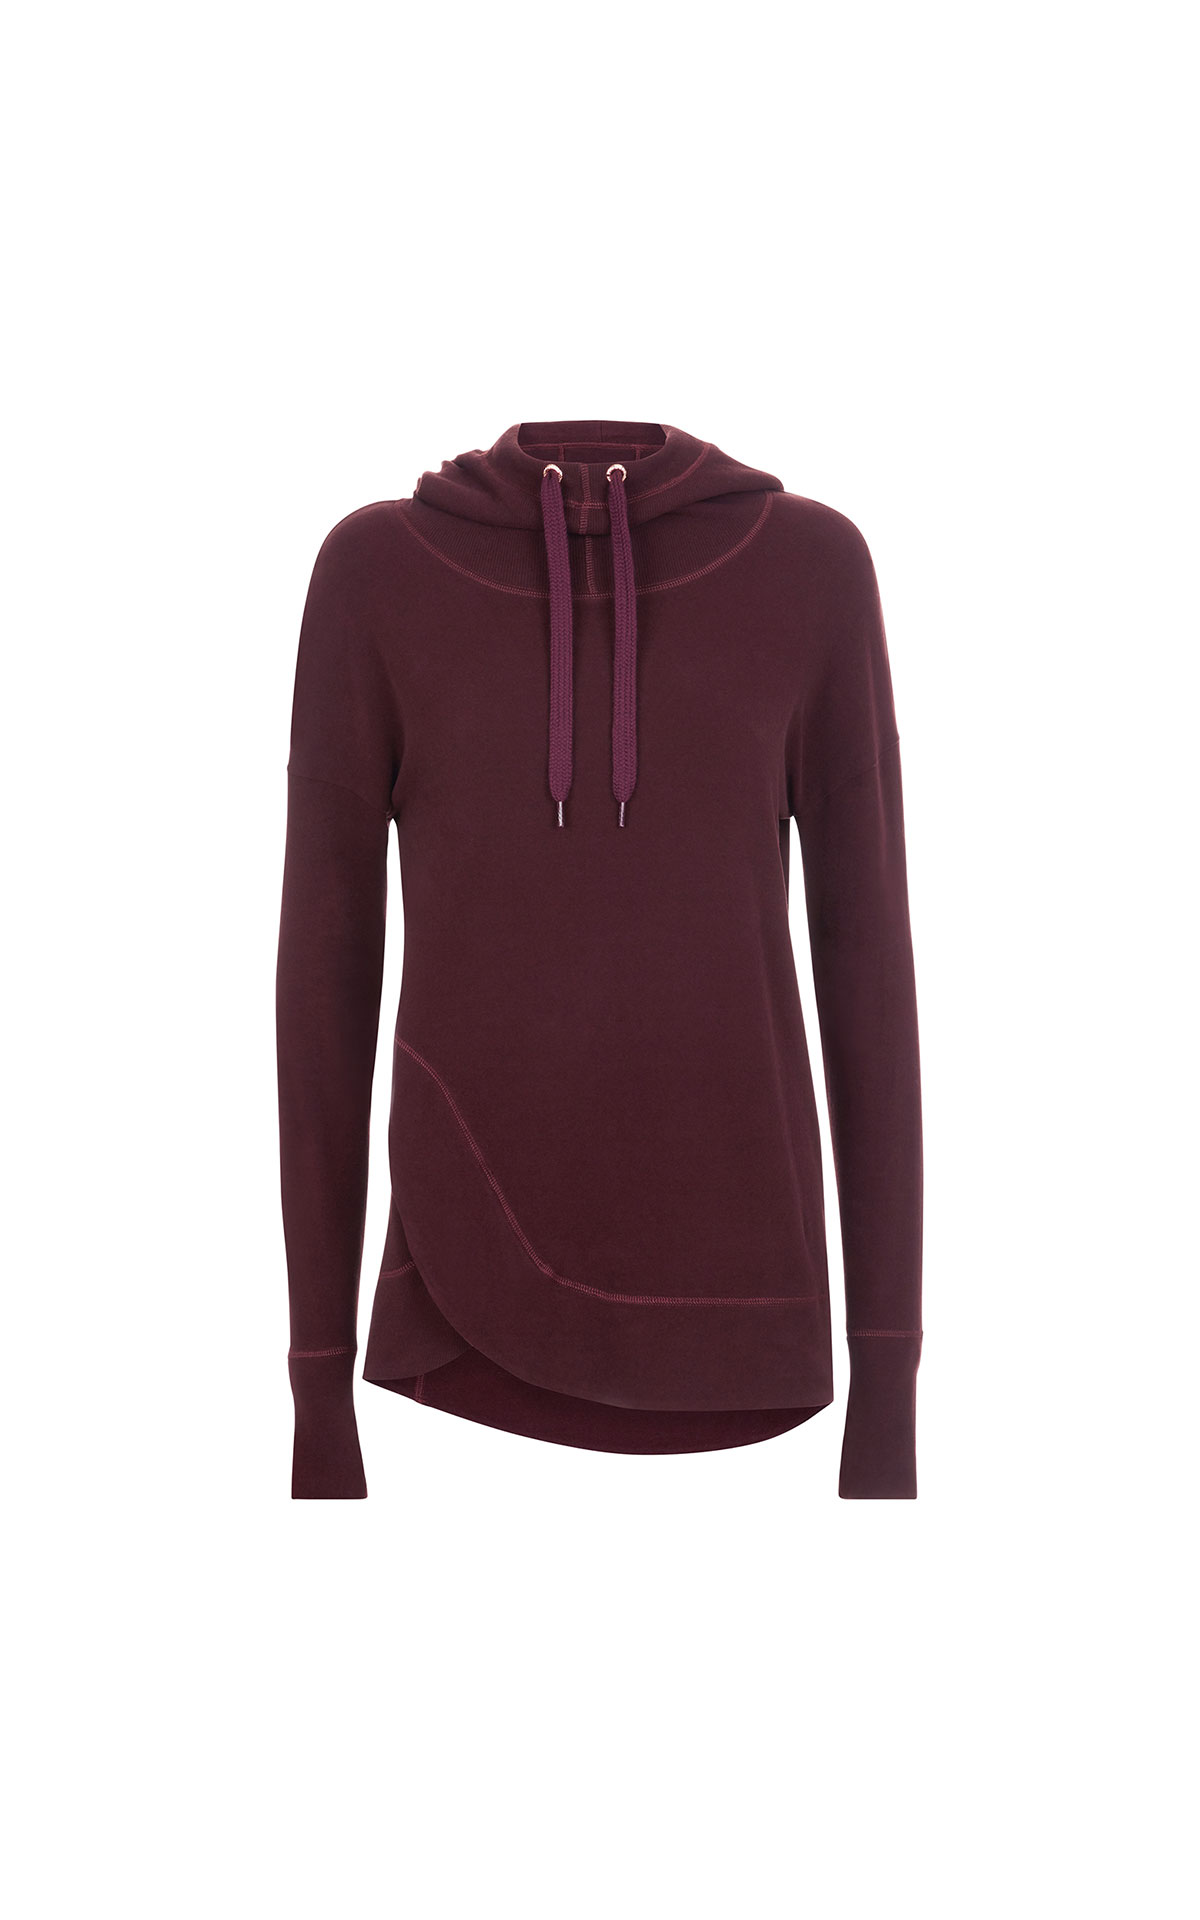 Sweaty Betty Escape luxe hoody from Bicester Village